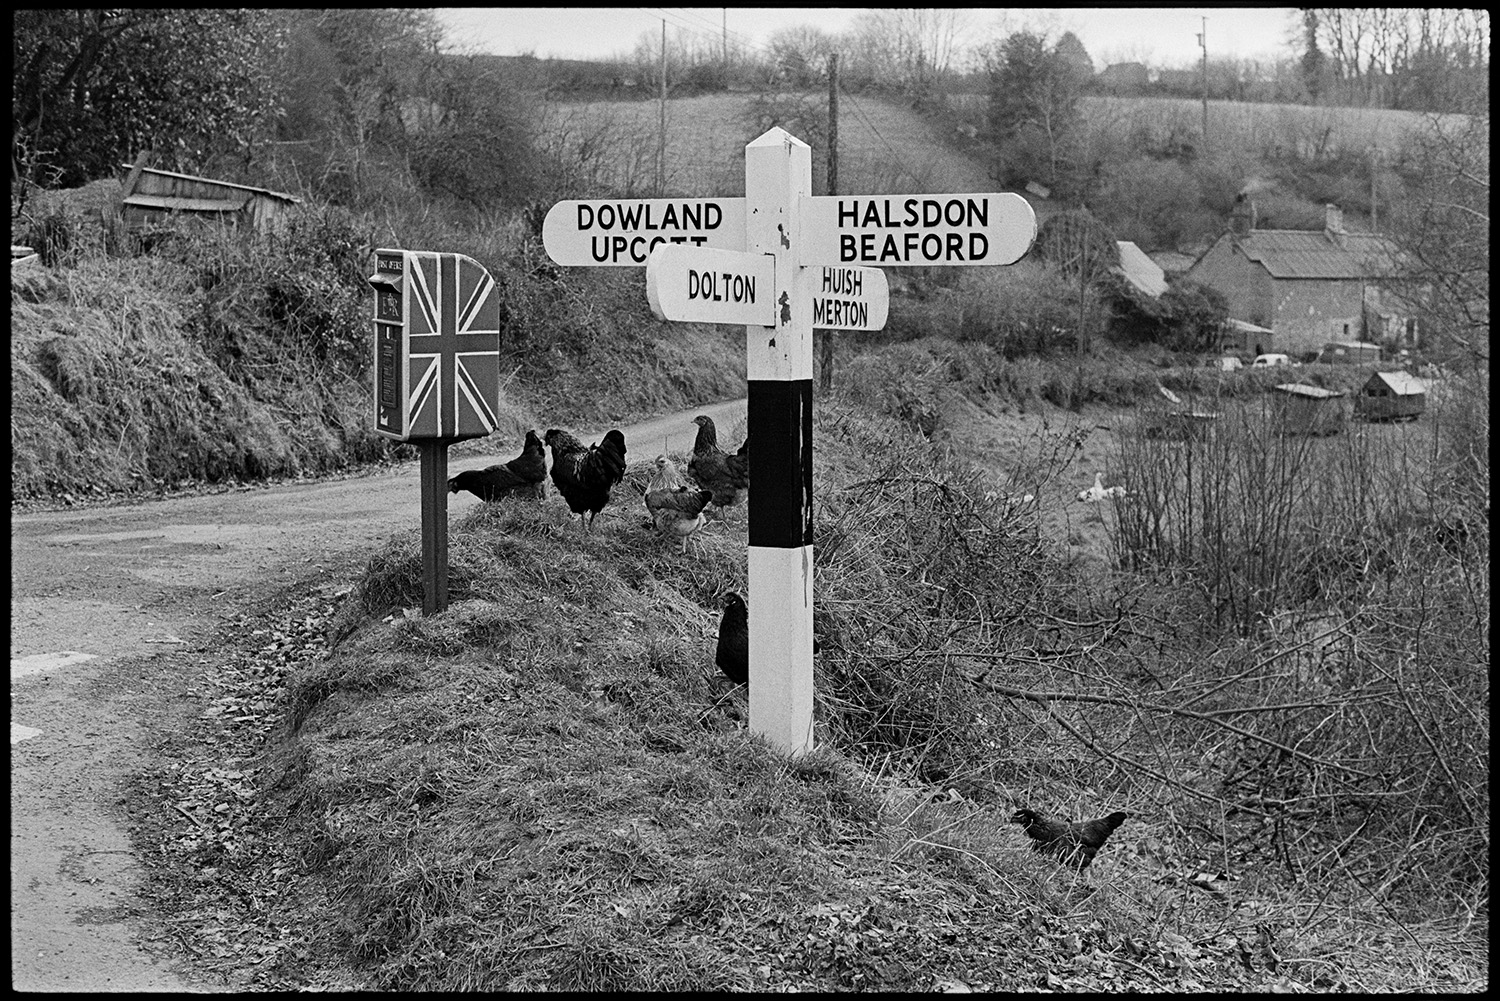 Snow scene with chickens and road sign at crossroads. 
[Chickens by a road and signpost at Woolridge Cross, near Millhams, Dolton. A post box with a union jack painted on it is next tot eh signpost and cottages can be seen in the background.]